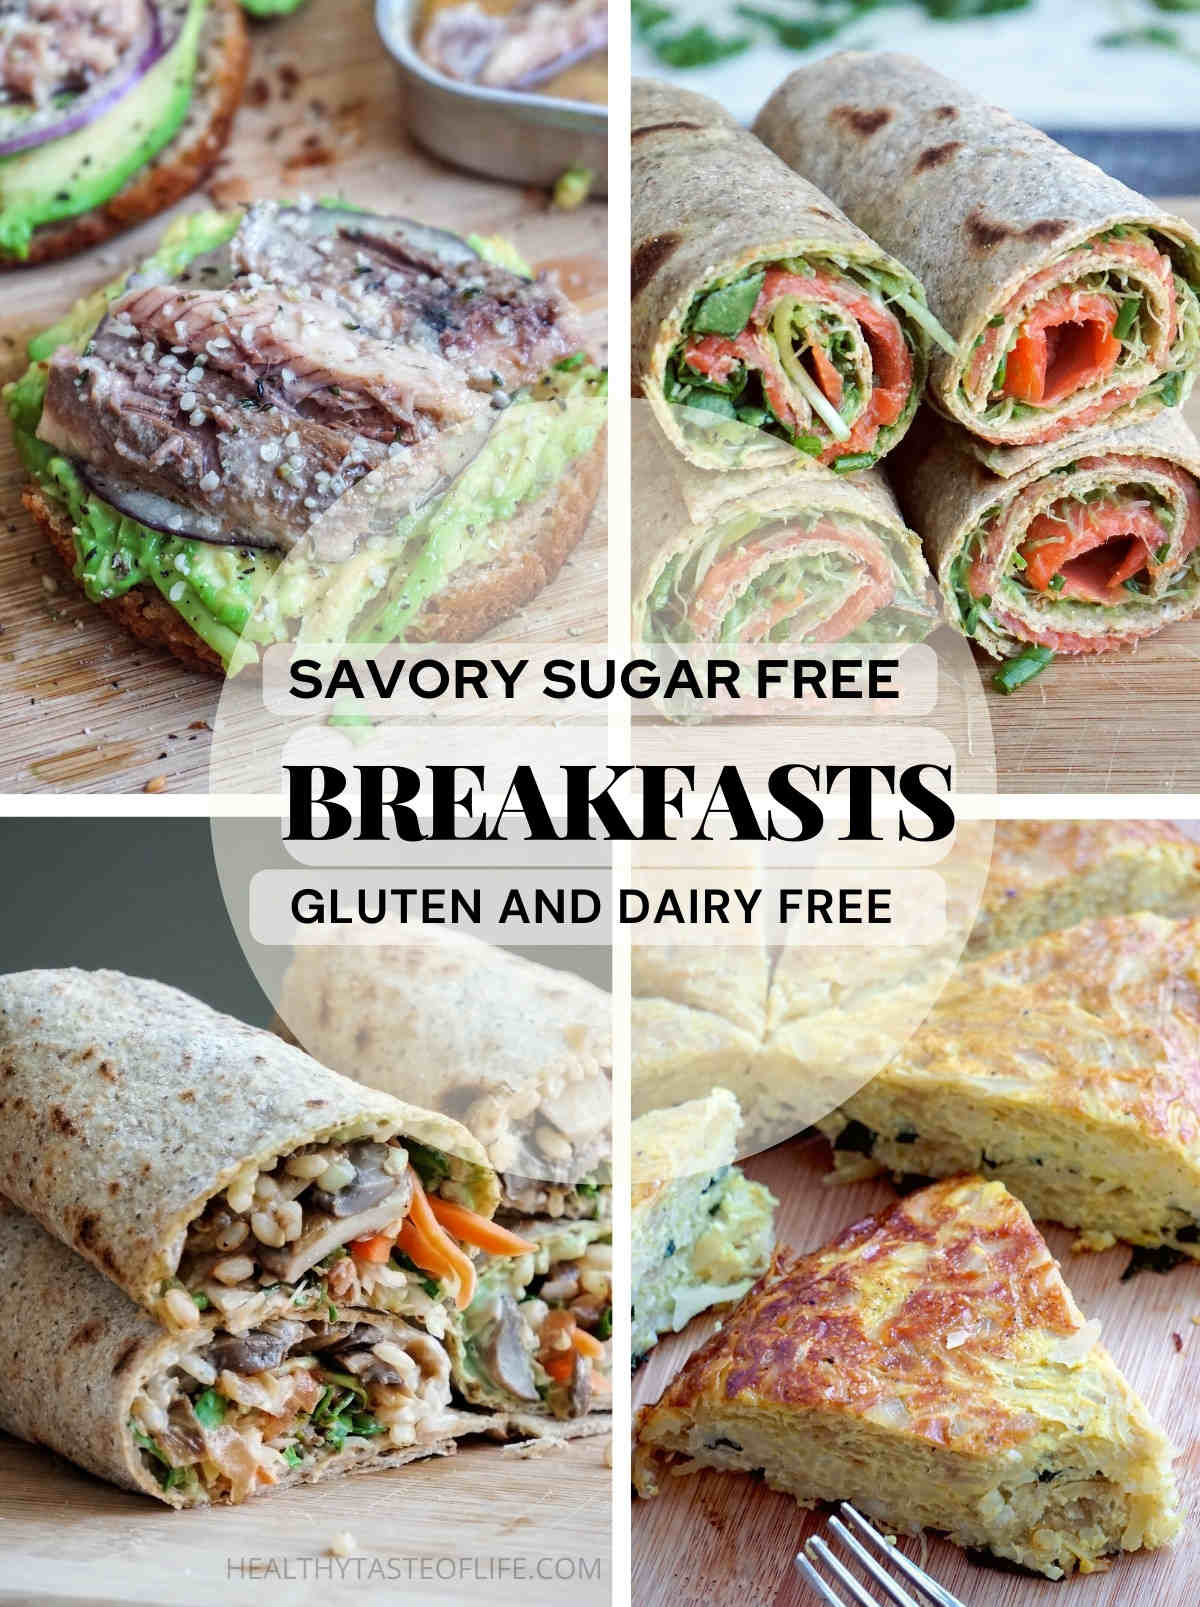 Savory breakfast ideas without sugar, gluten free and dairy free, clean eating breakfast: burritos, skillet casserole, avocado toast or tortilla roll ups.